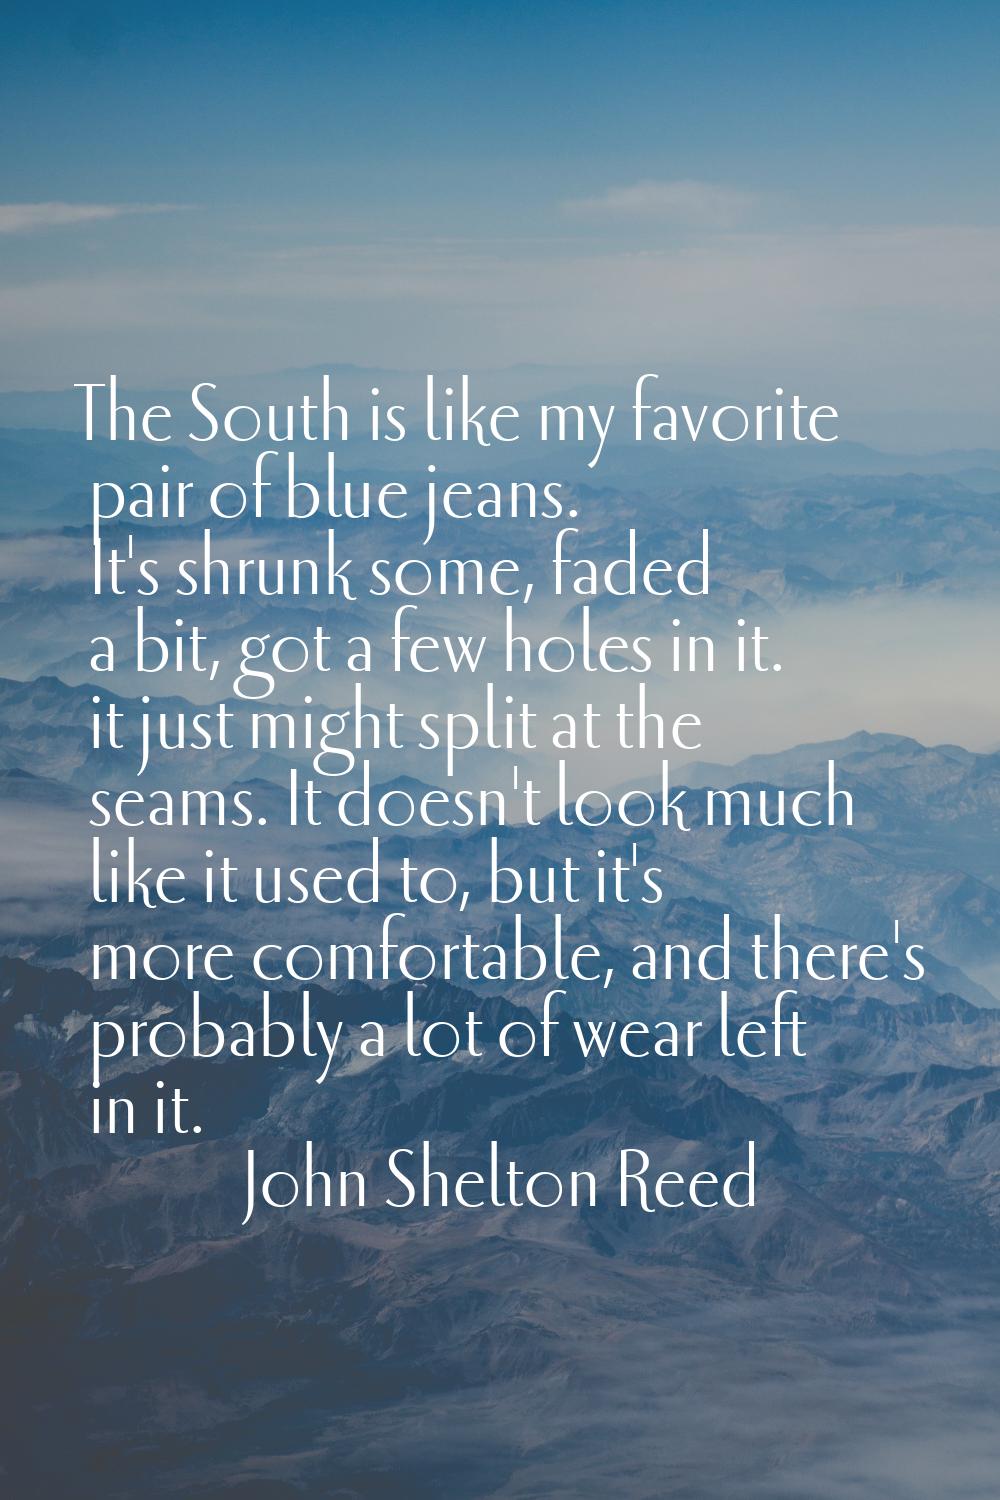 The South is like my favorite pair of blue jeans. It's shrunk some, faded a bit, got a few holes in